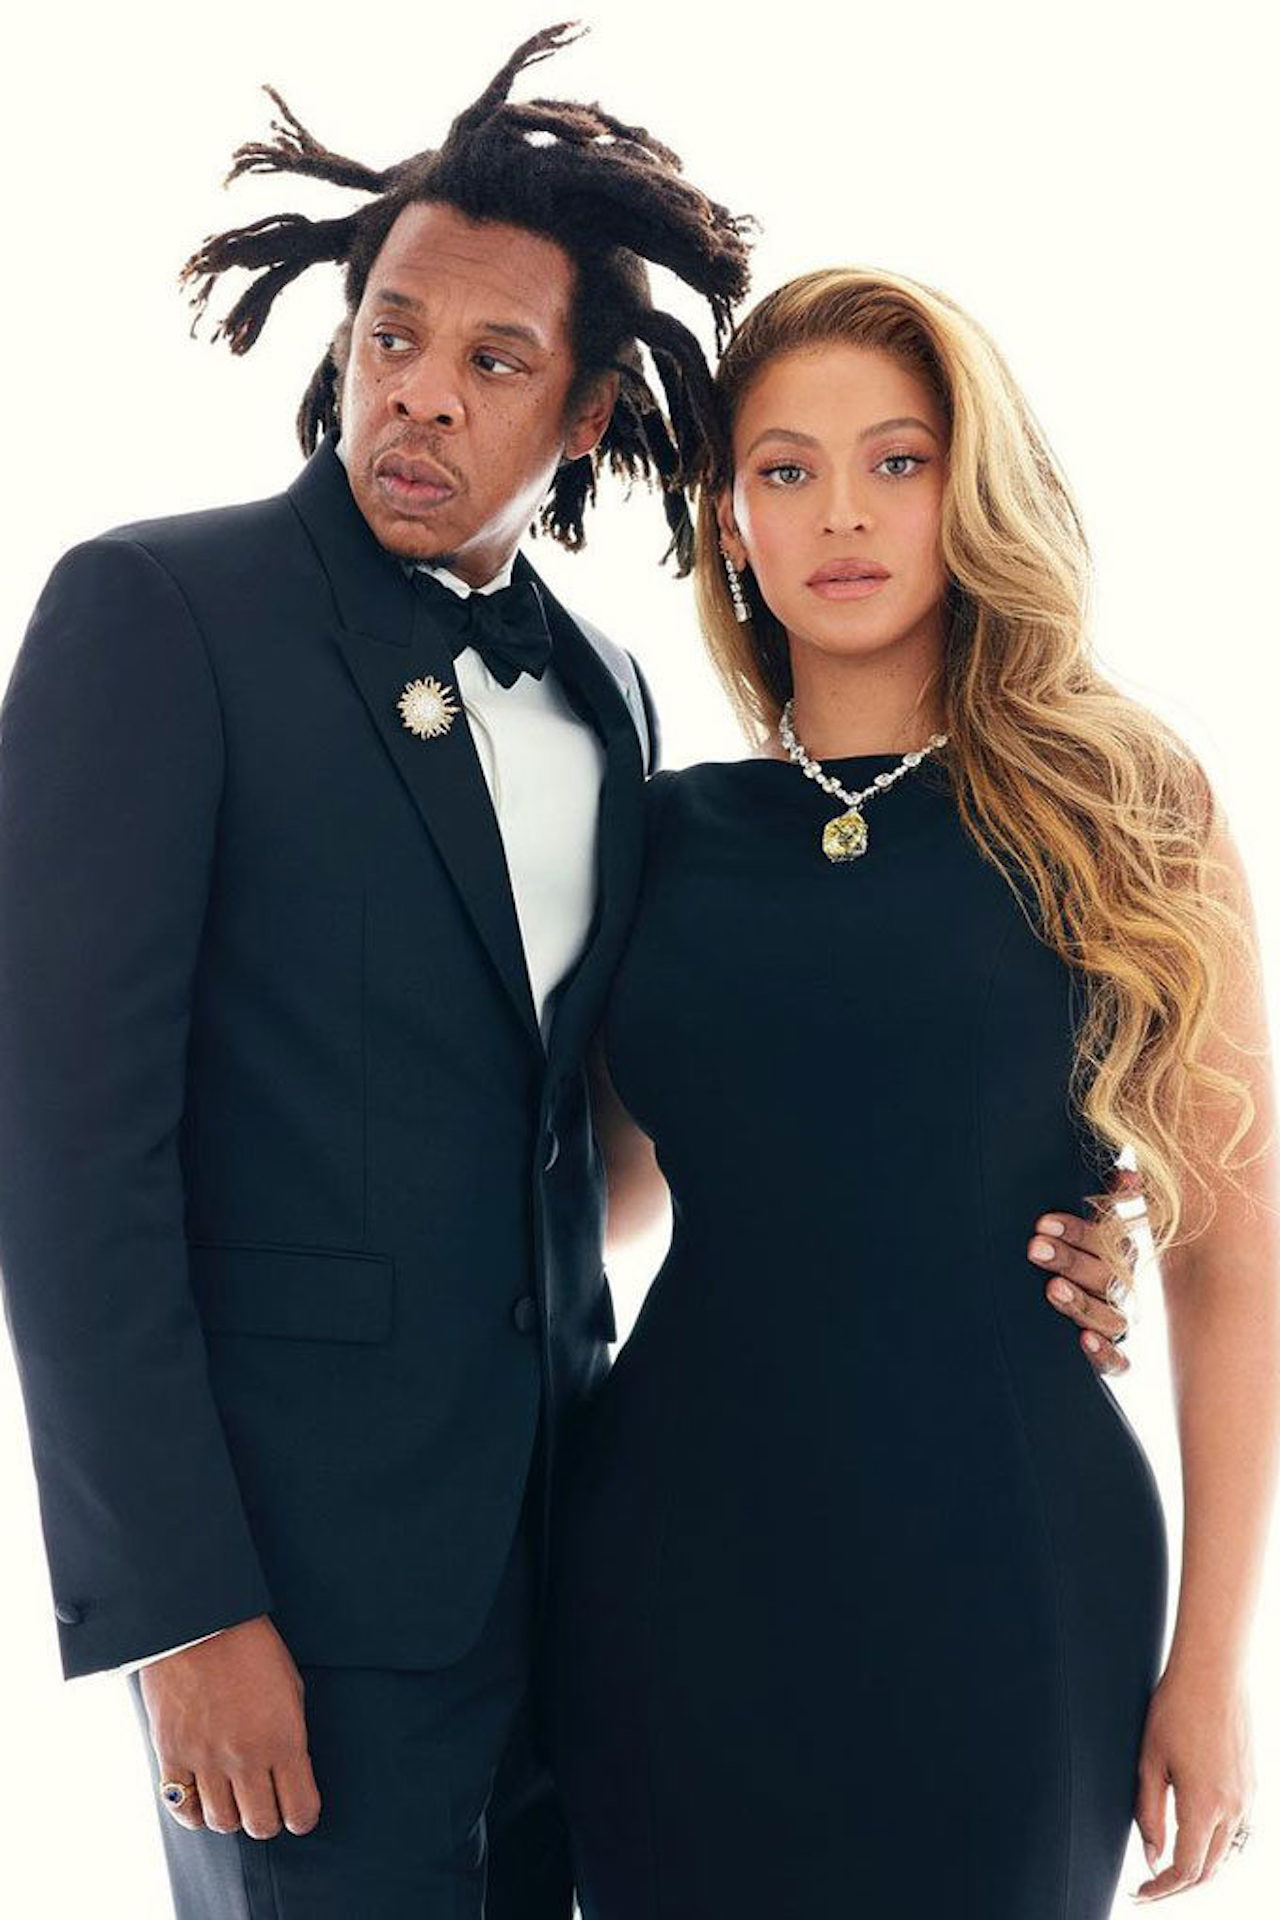 beyonce and jay z musci video